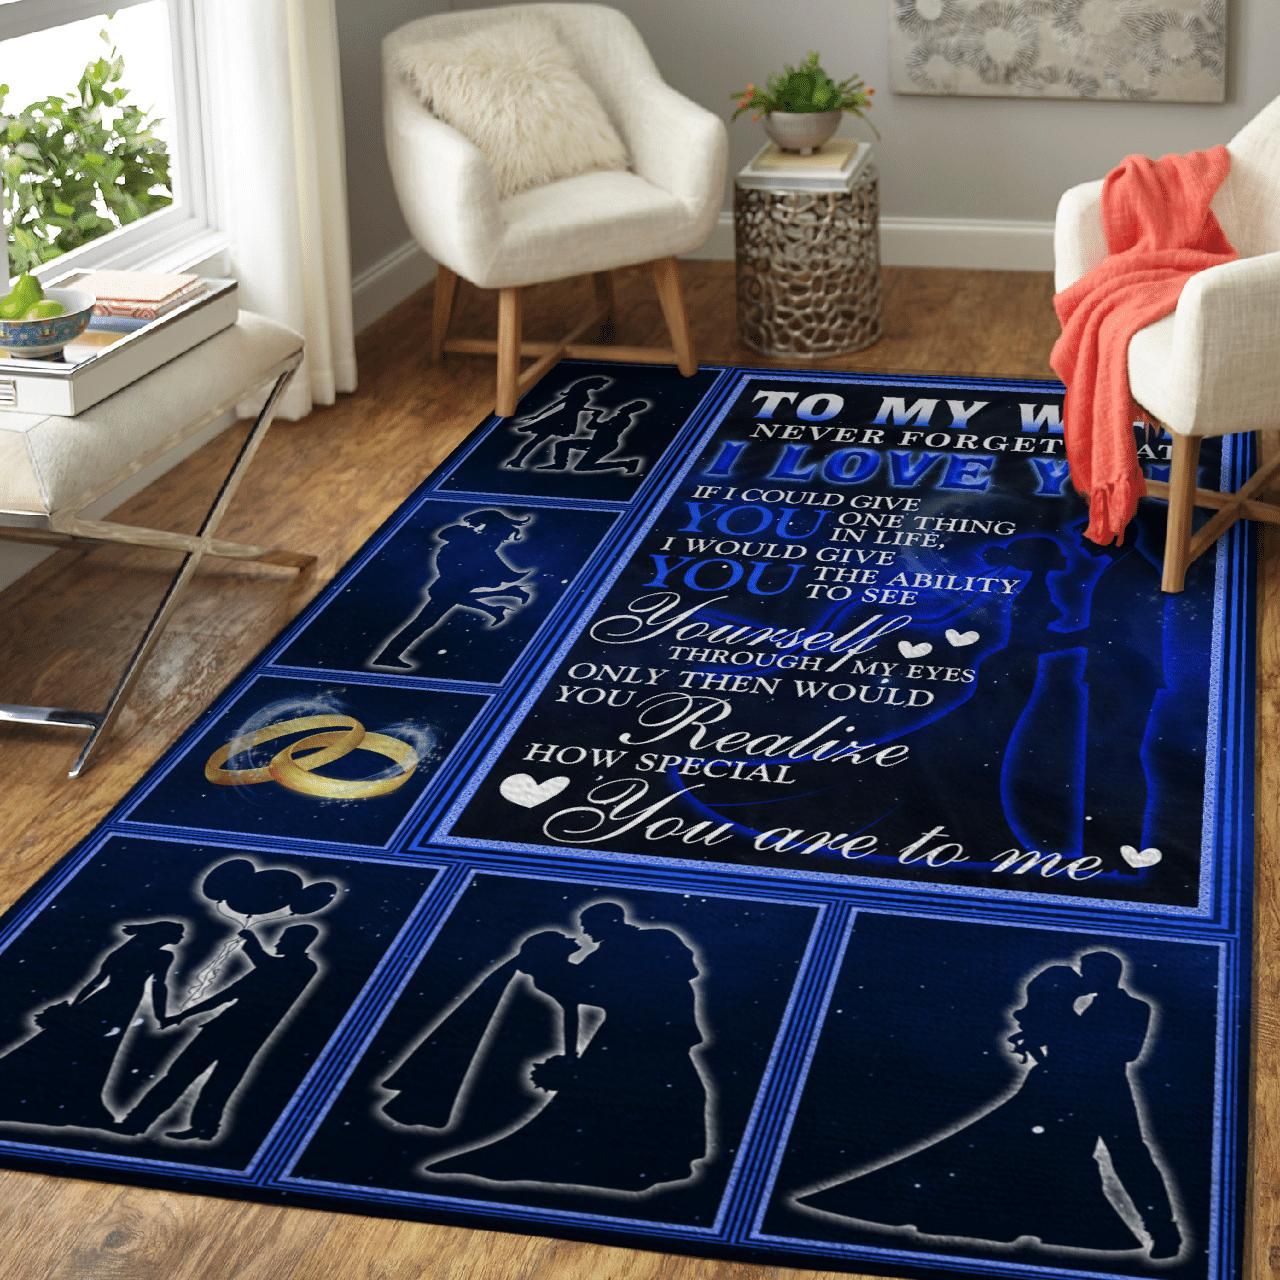 To My Wife Never Forget That I Love You Husband Gift For Wife Valentine Gift Area Rug